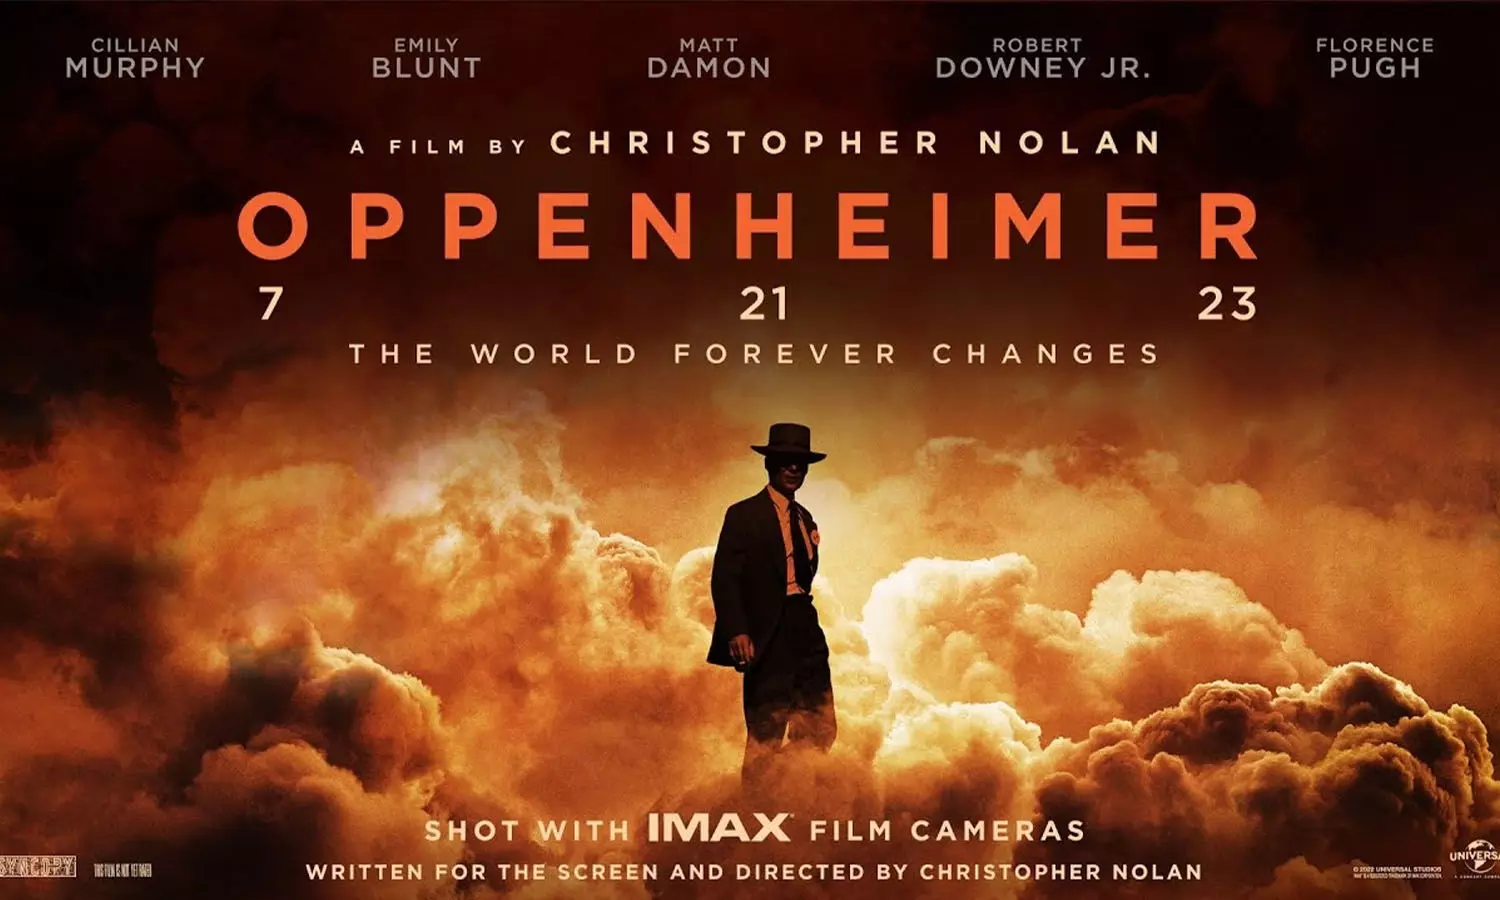 Oppenheimer movie review, cast, rating : Riveting cinematic experience with a bit of whitewash and fact twisting.